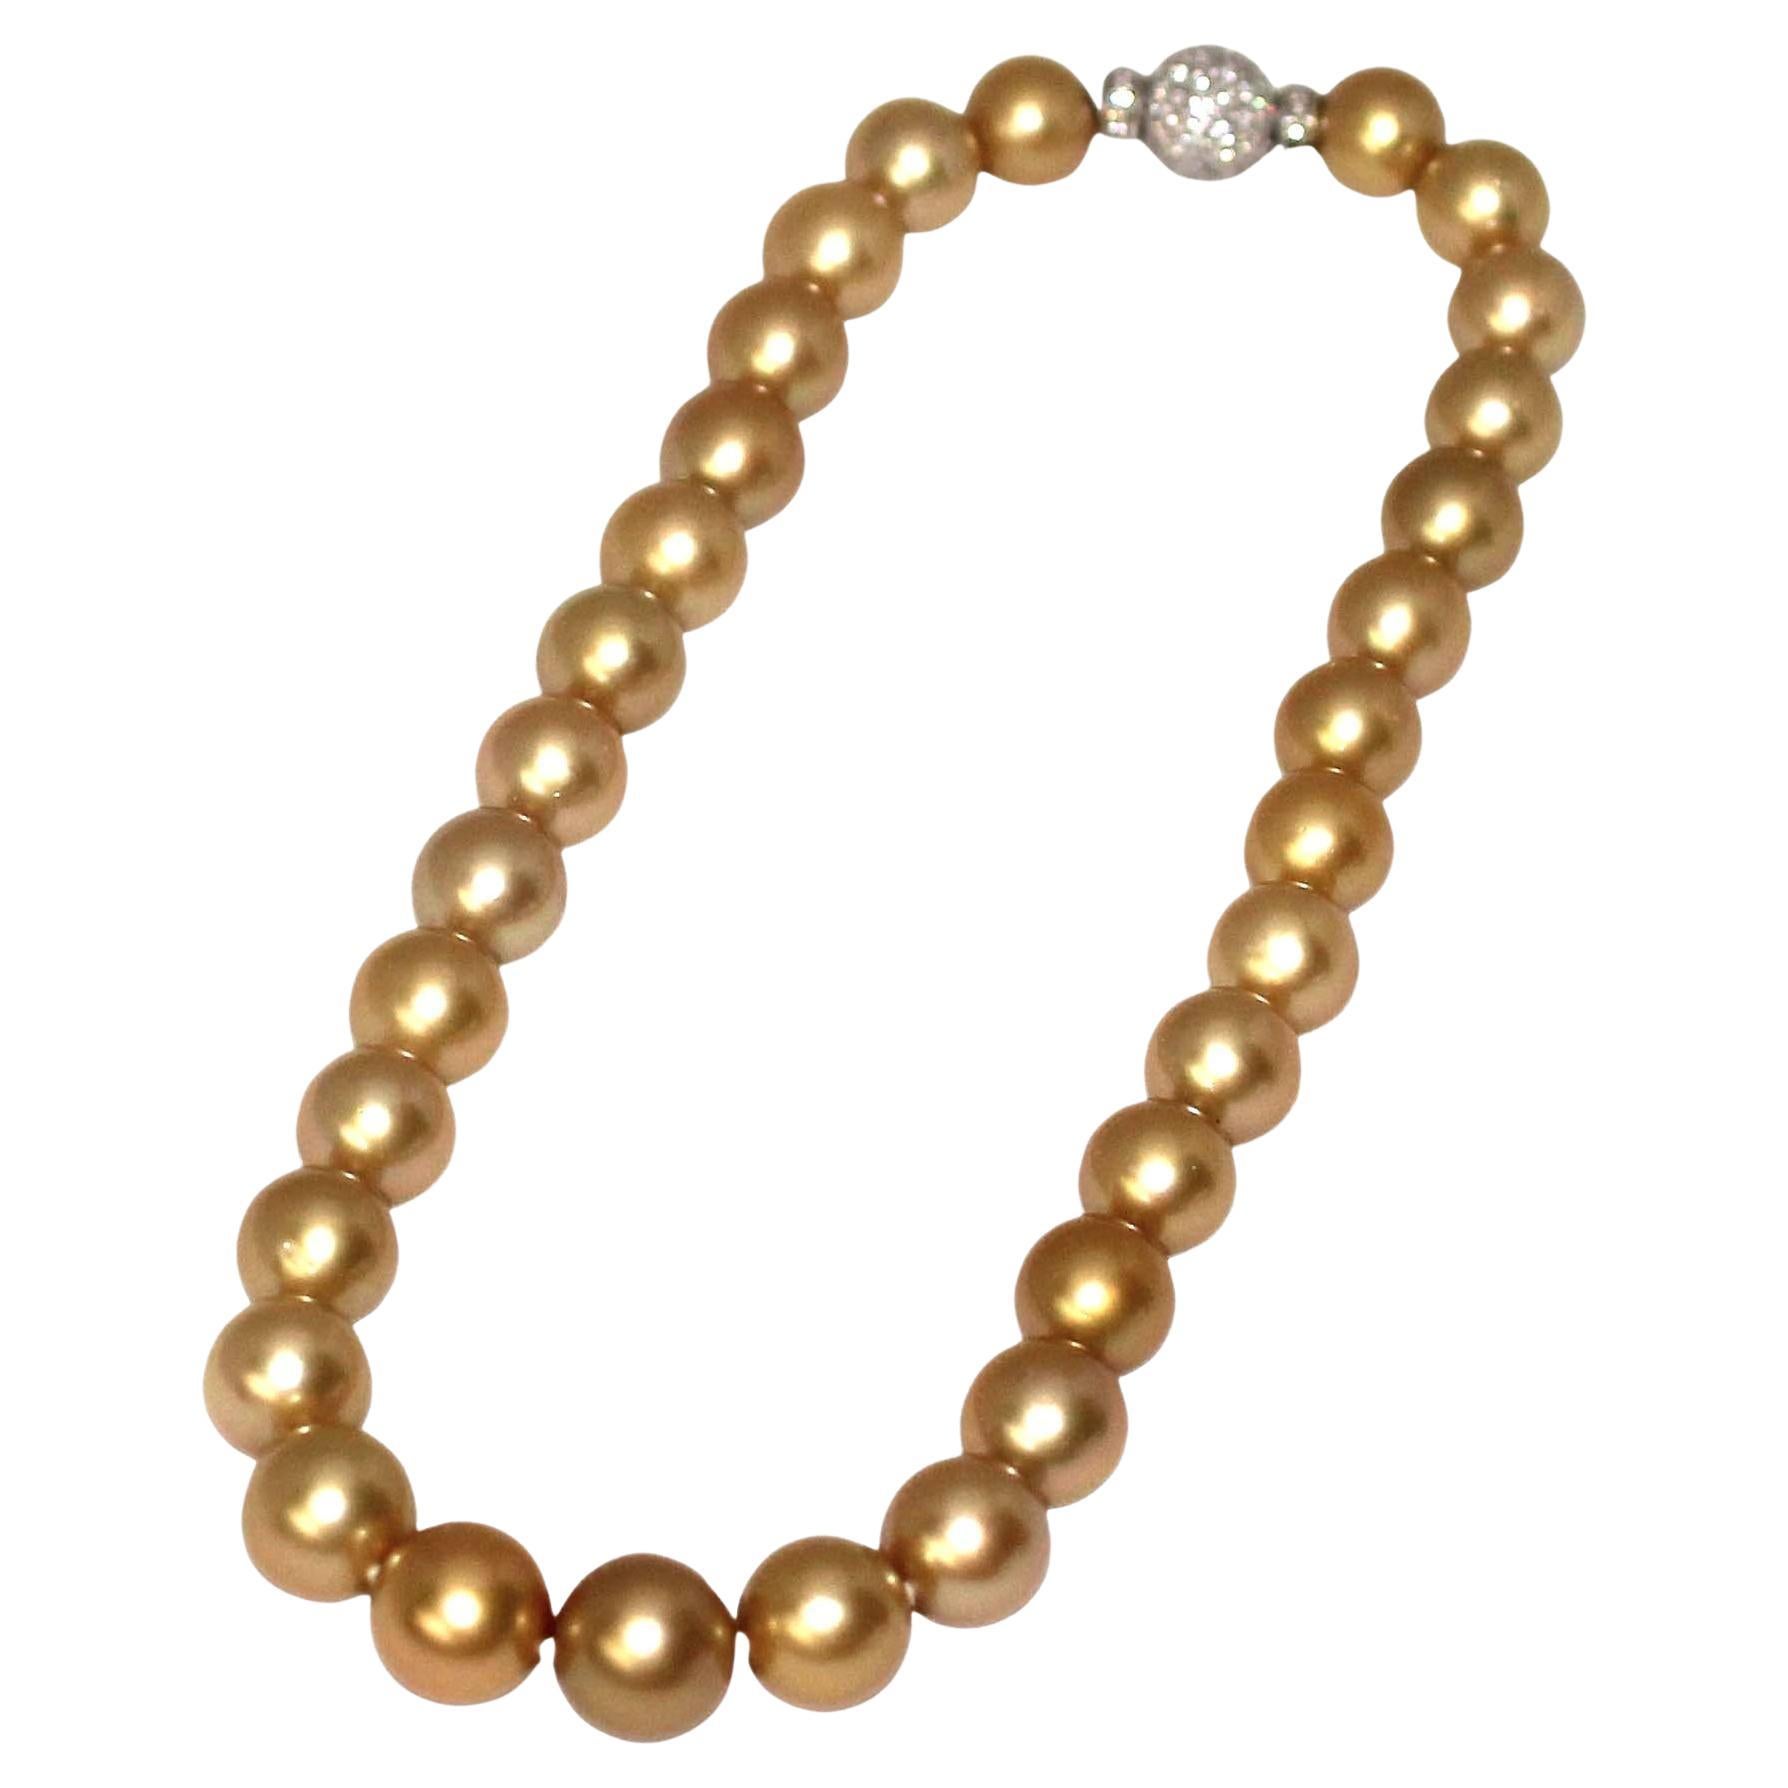 Hakimoto 15x12 mm Natural Color Rare Deep Golden Pearls with Diamond Clasp